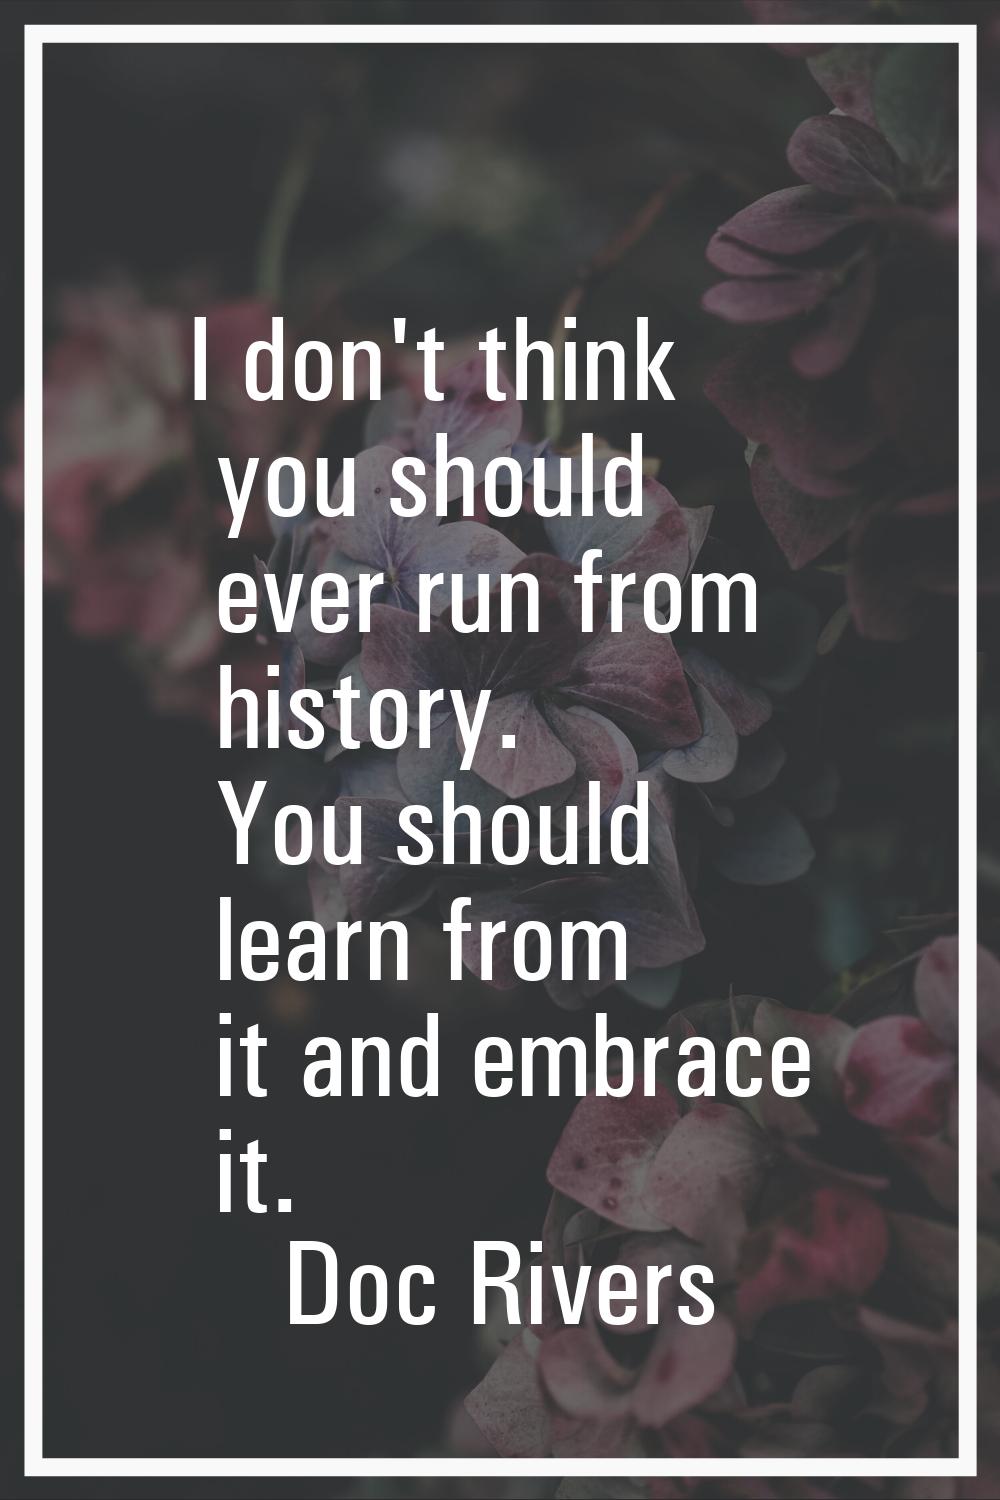 I don't think you should ever run from history. You should learn from it and embrace it.